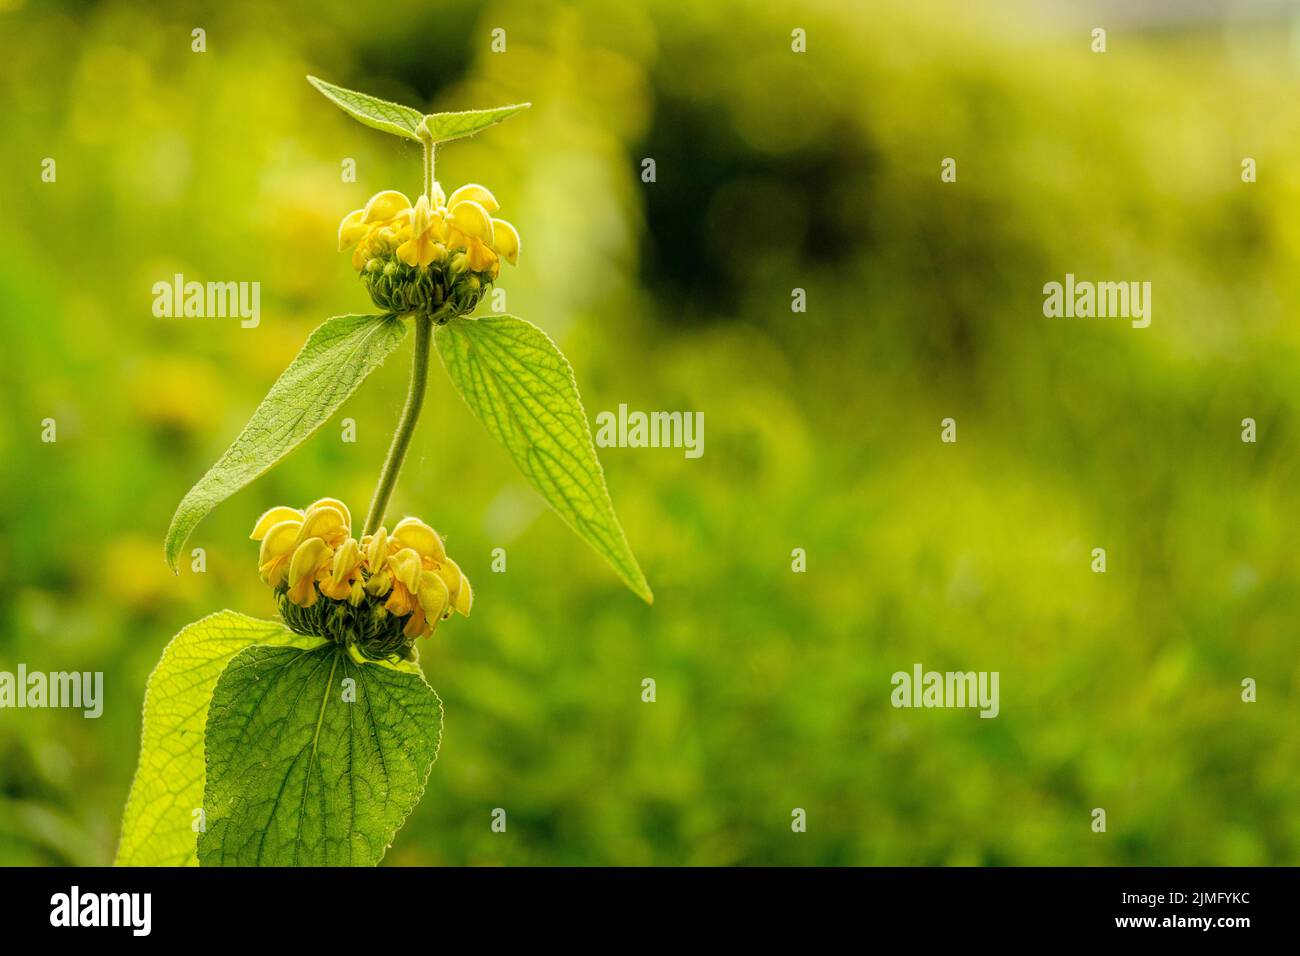 A closeup shot of a Phlomis russeliana with blurred greenery in the background. Stock Photo